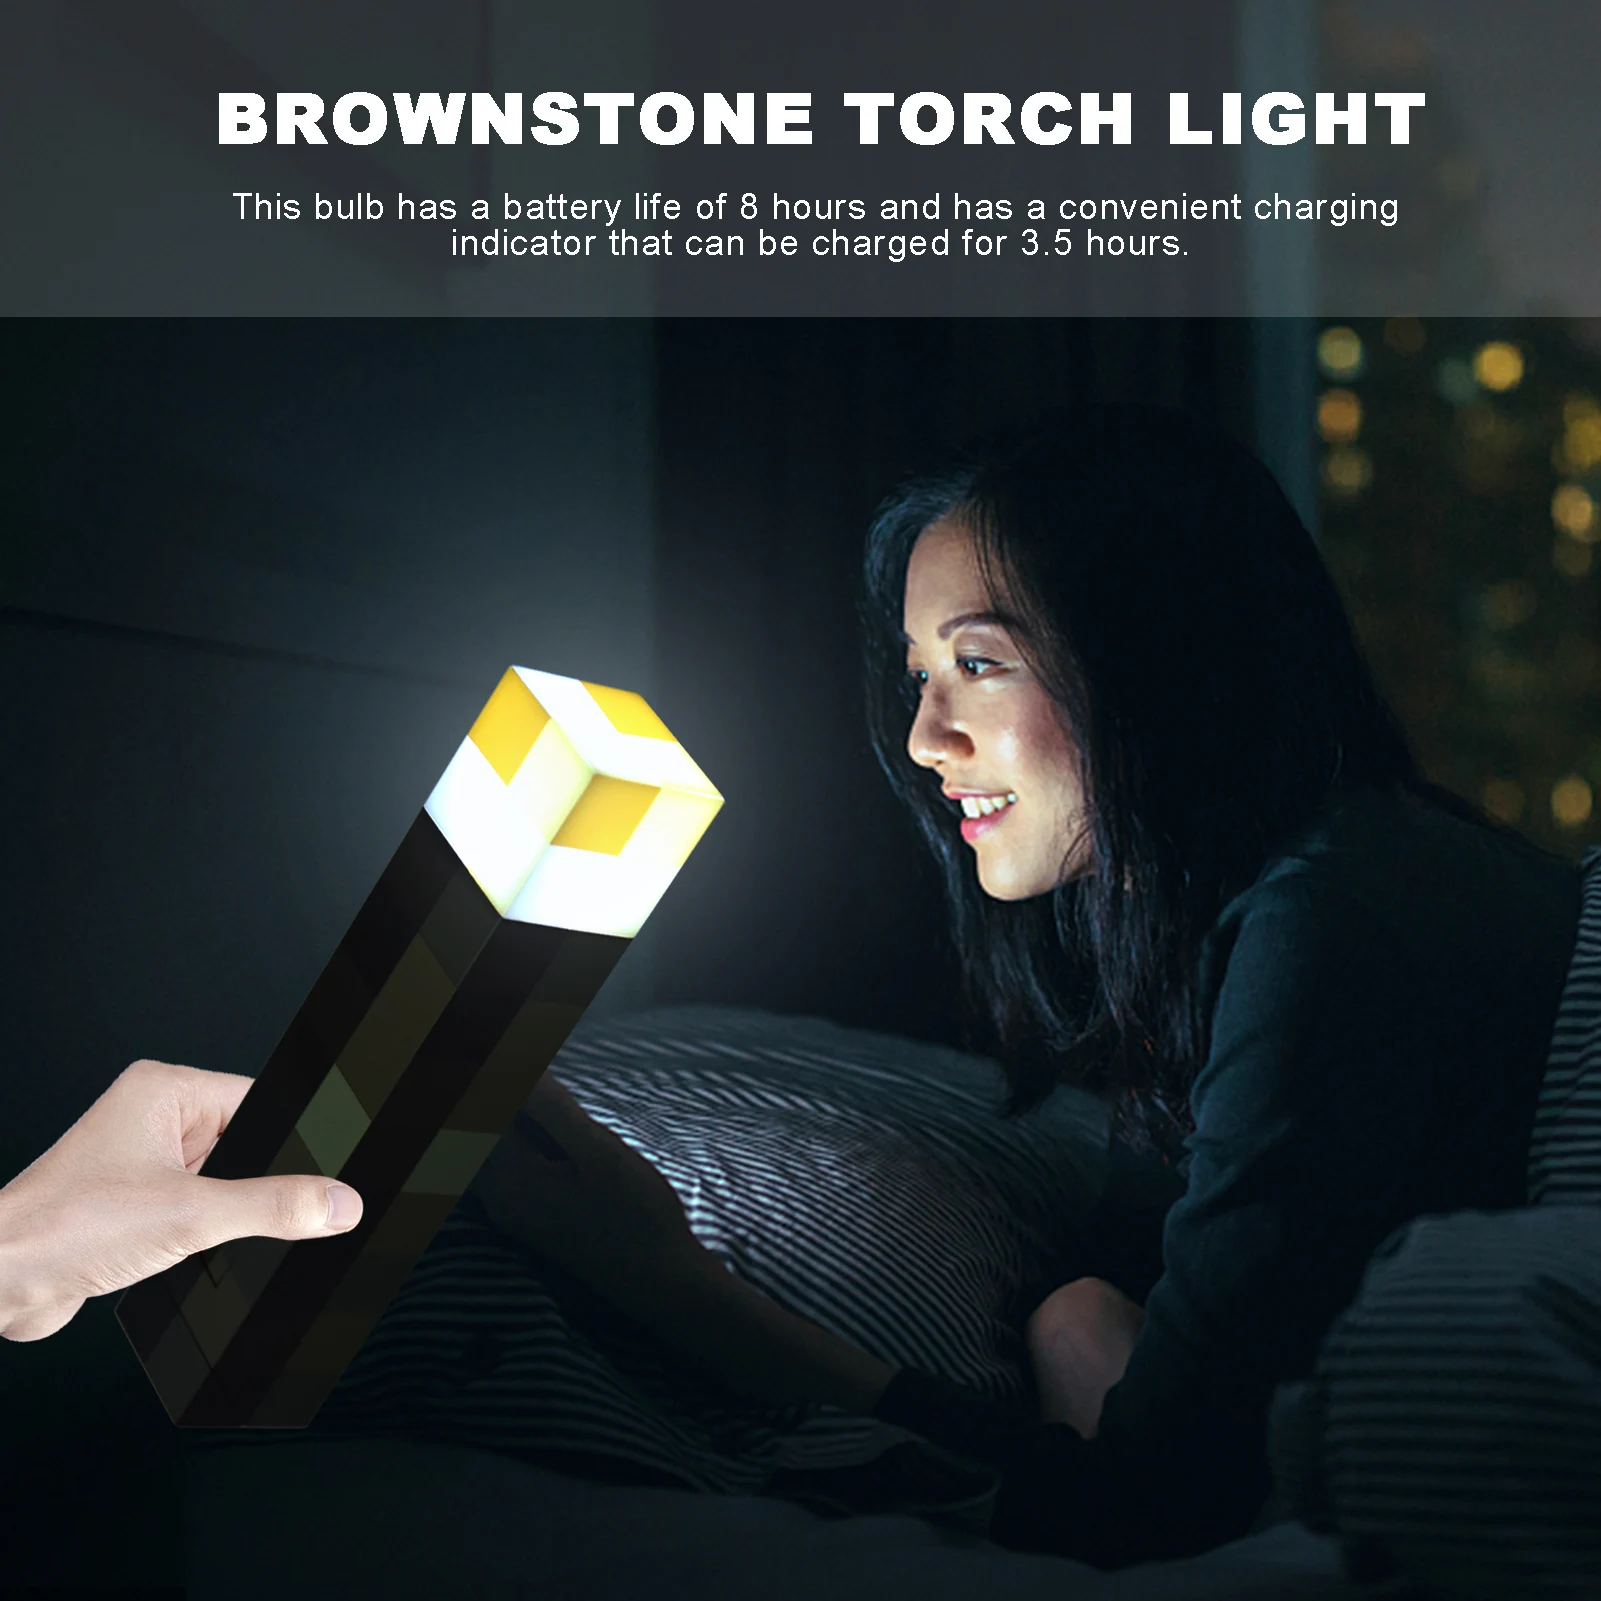 11.5 Inch Brownstone Torch Led Lamp Usb Rechargeable Night Light Lights Lighting red night light Night Lights